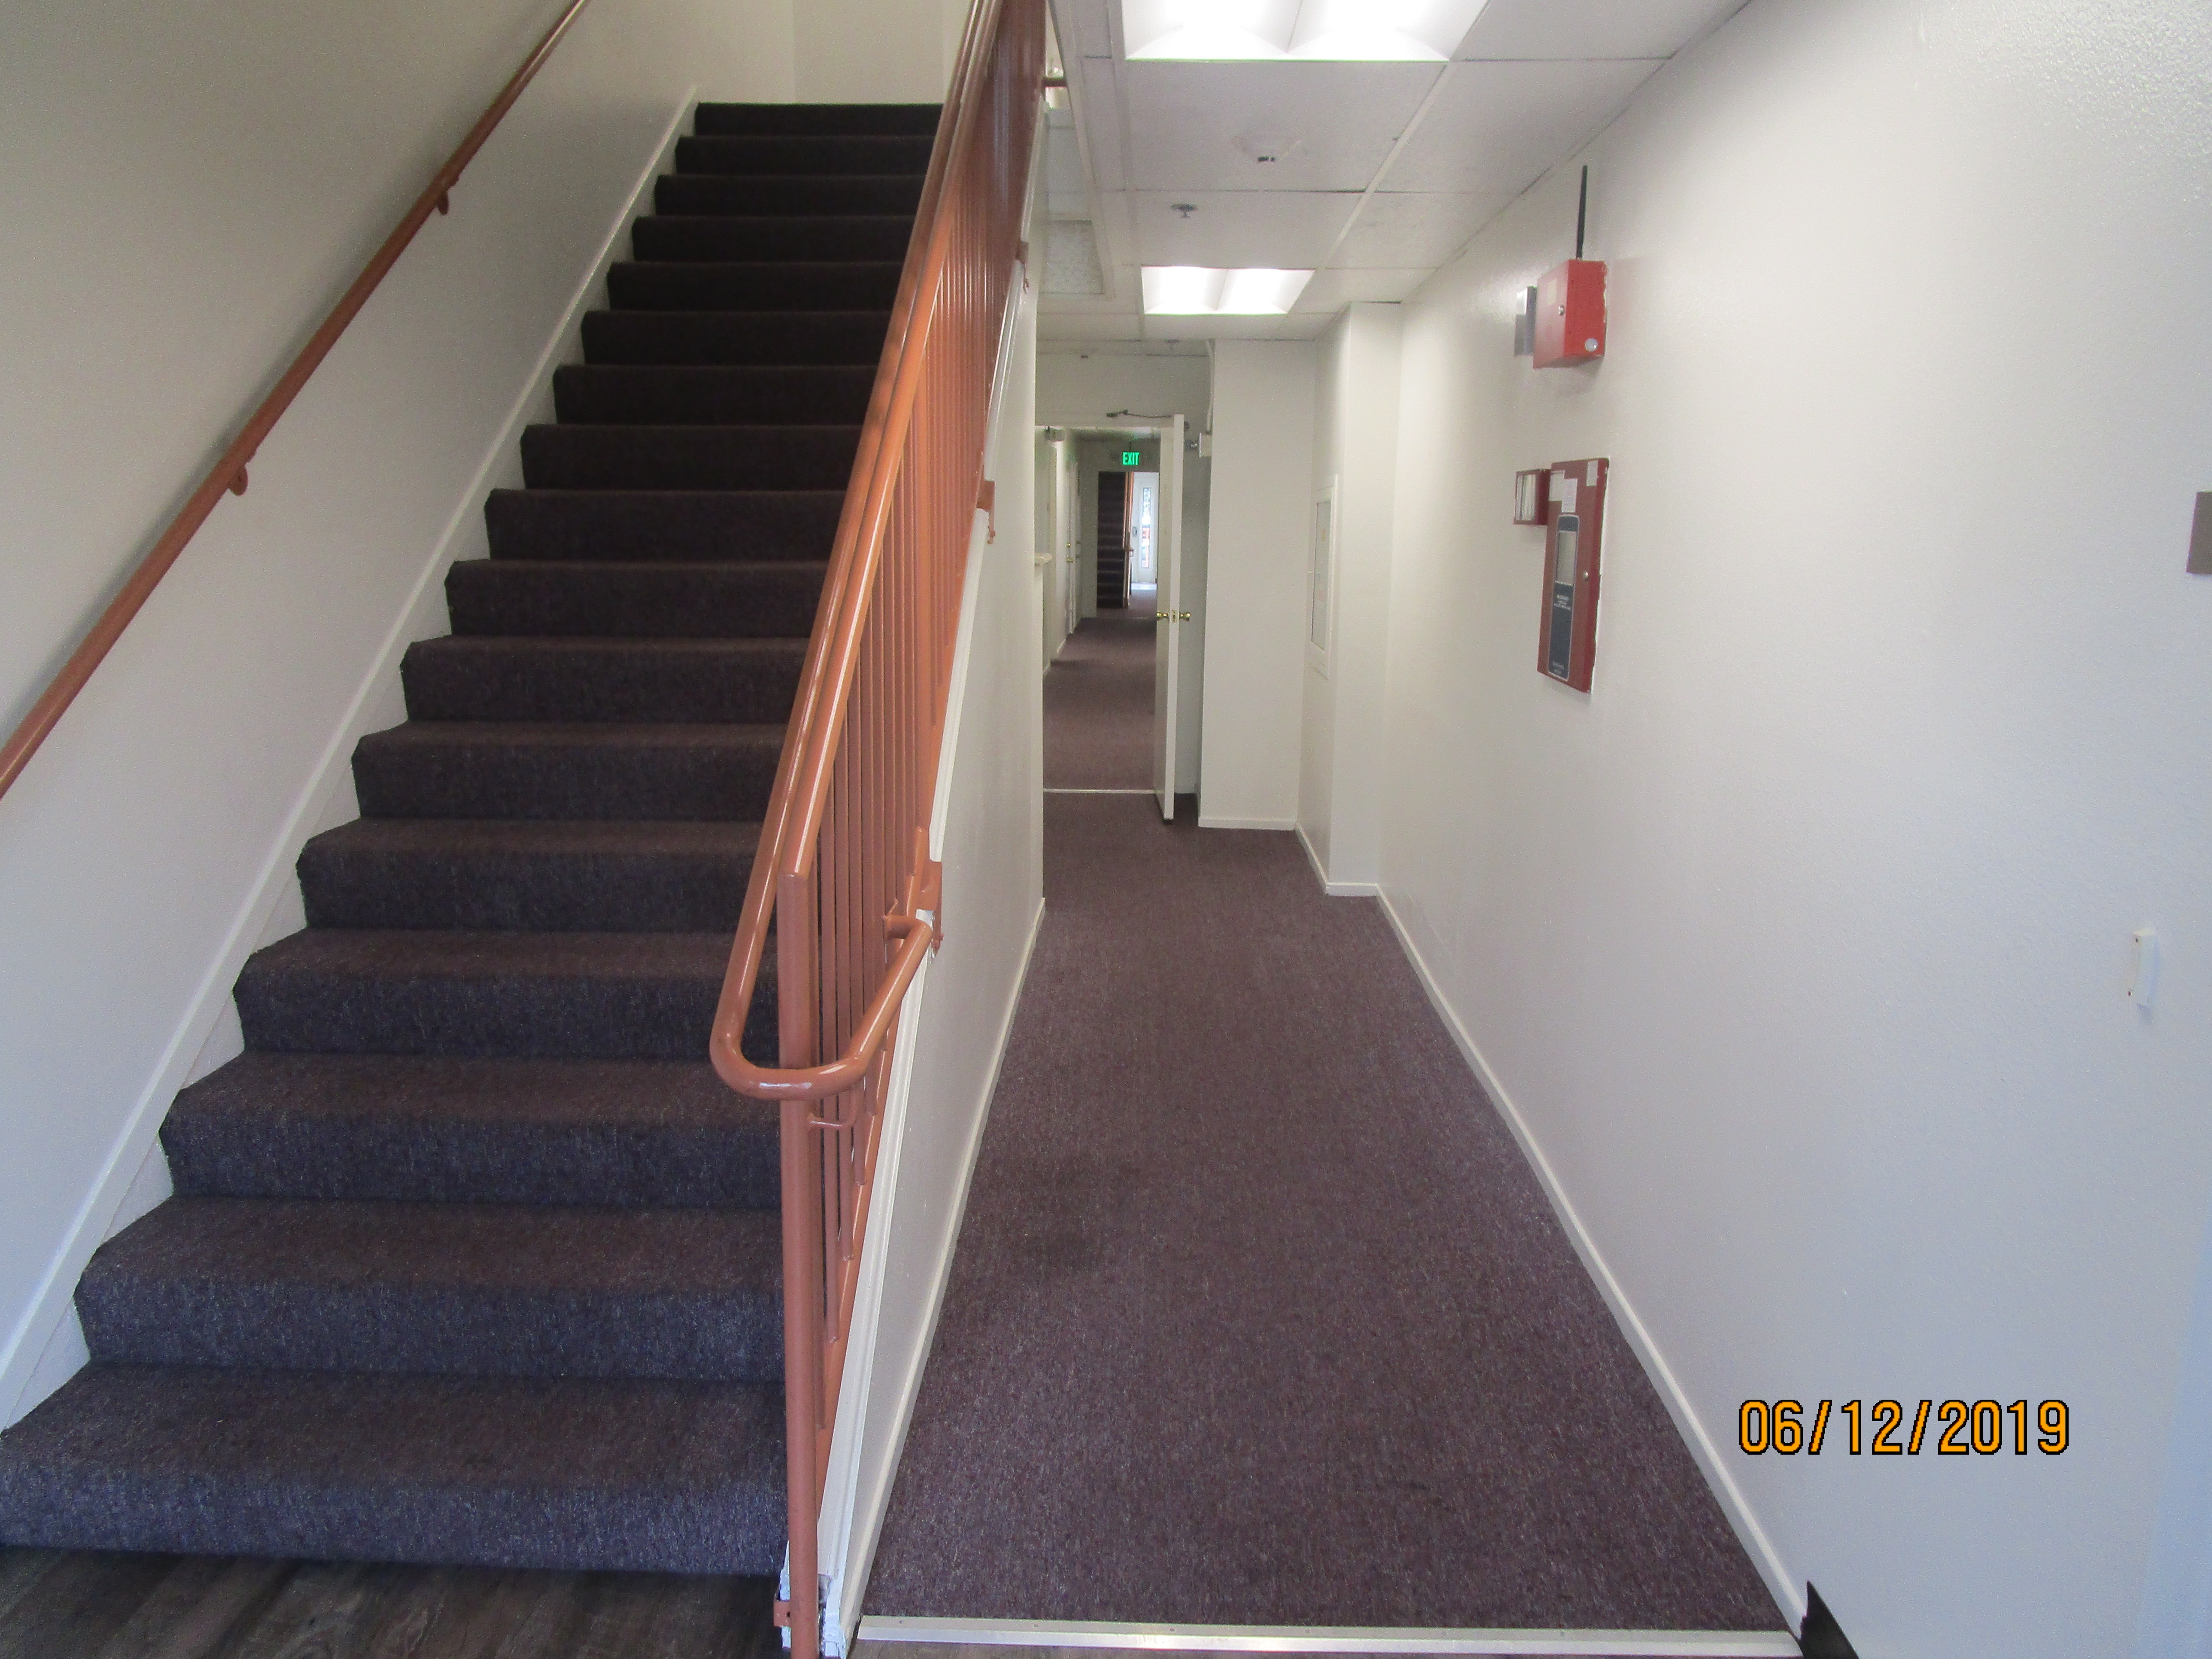 A seventeen carpeted stairway with metal handrails on each side, a brown carpeted hall.